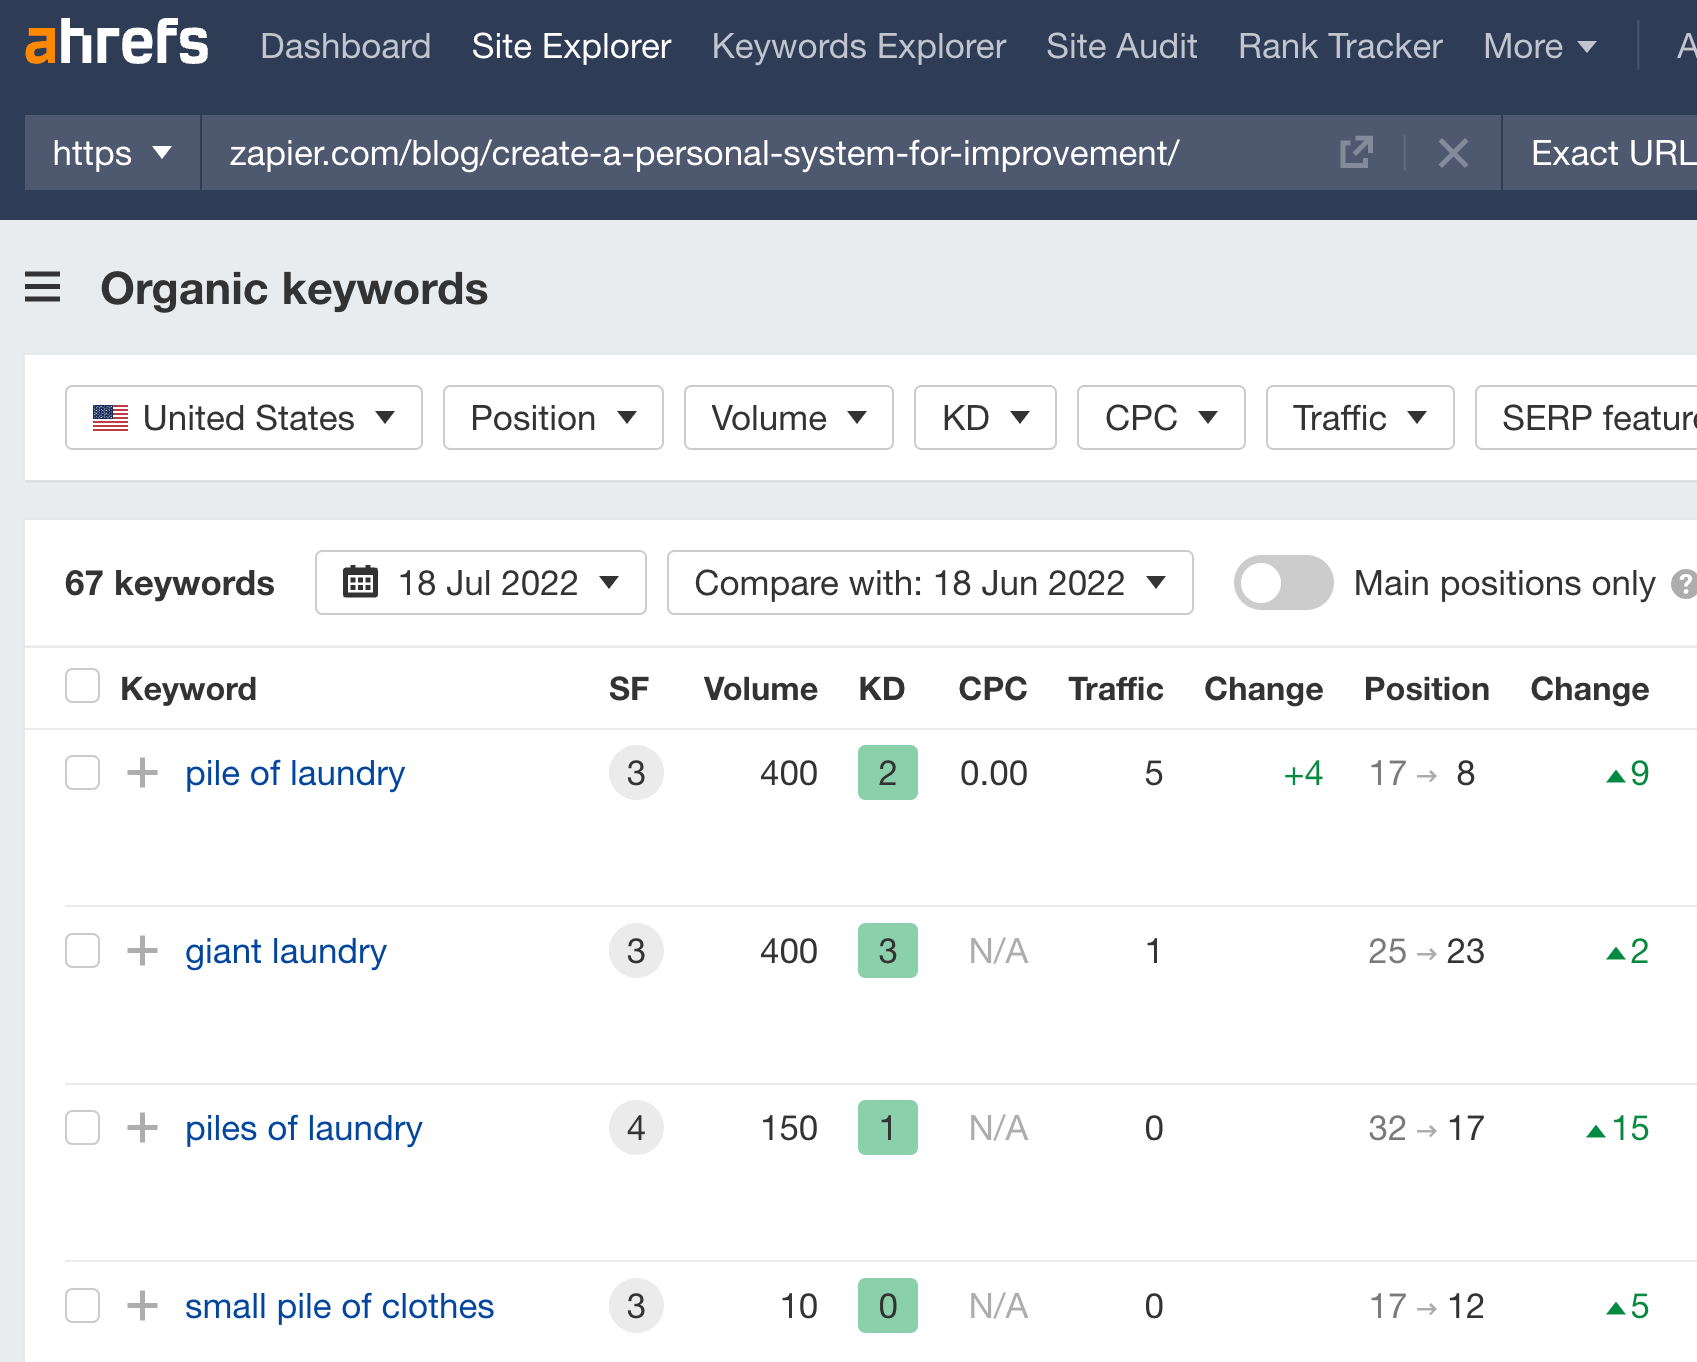 One of Zapier's articles ranking for irrelevant keywords